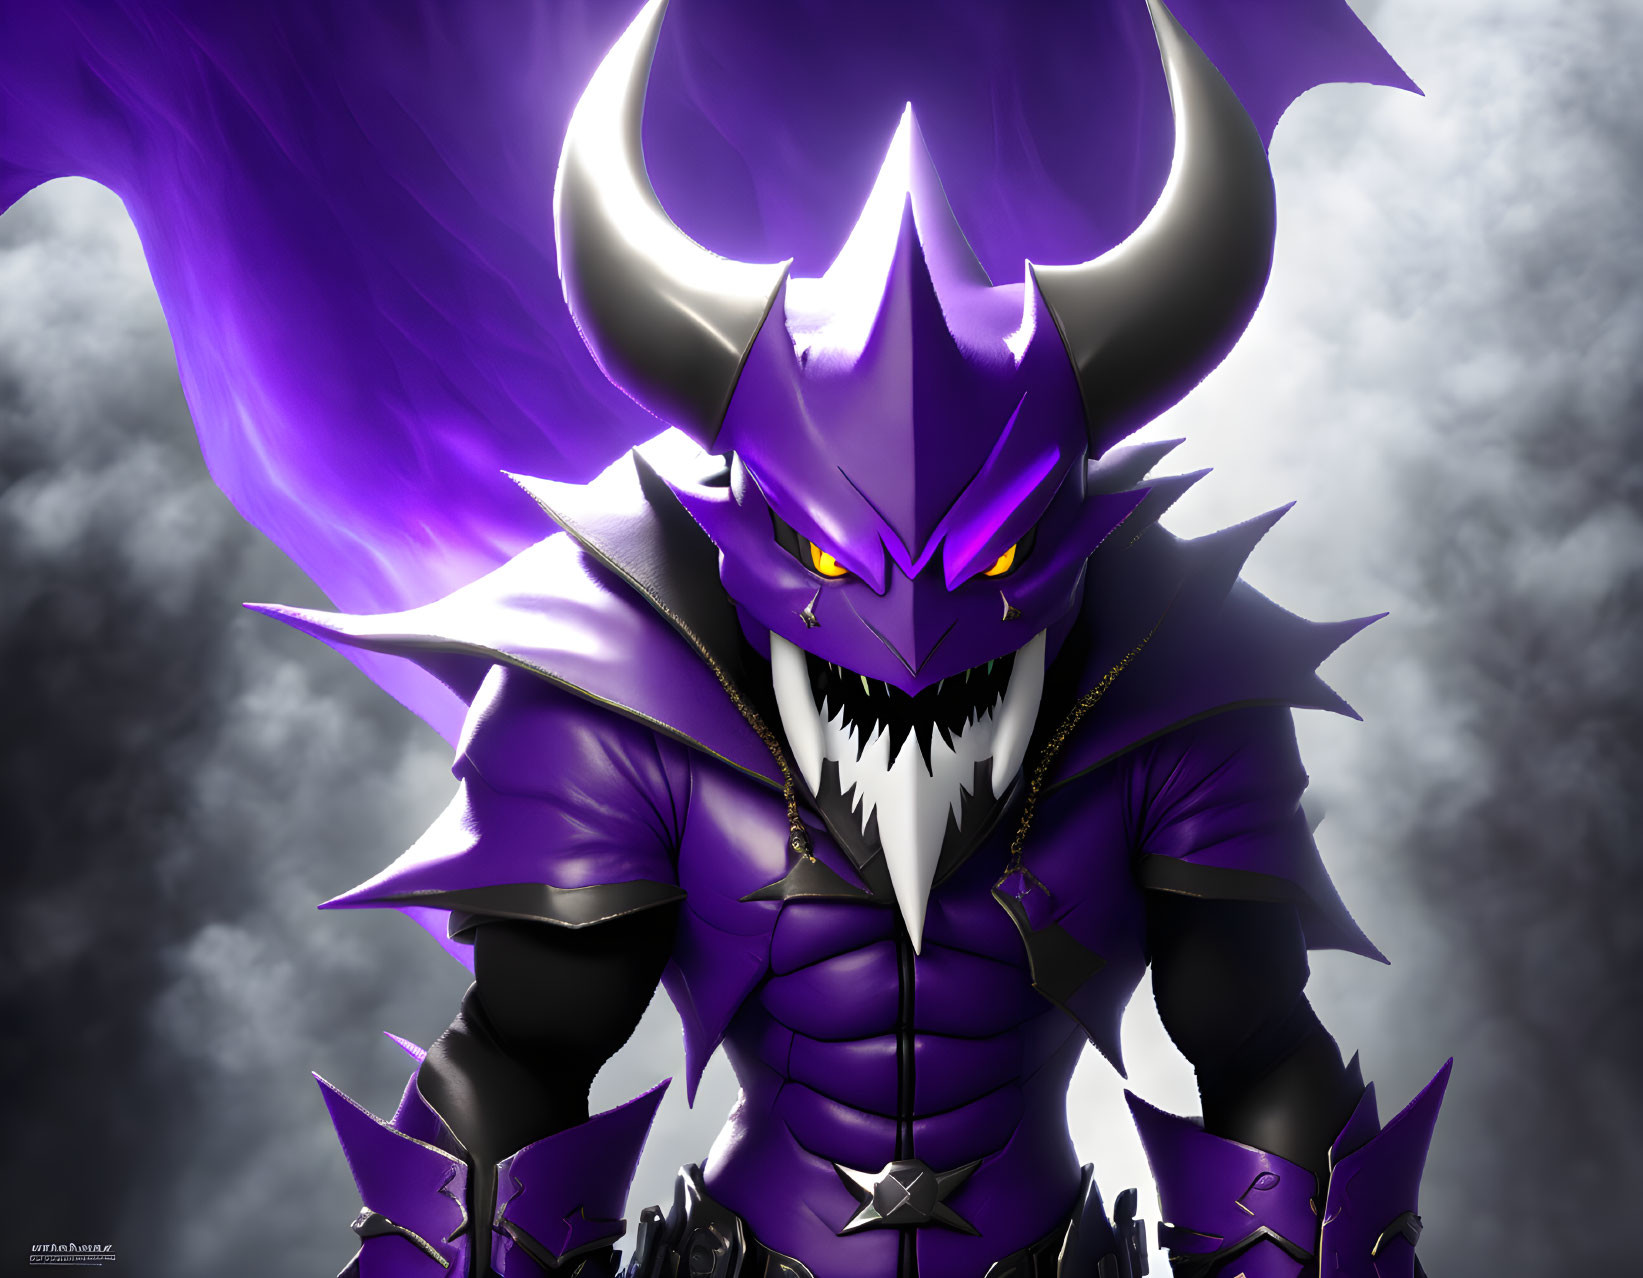 Dark Armor with Purple Accents and Horned Helmet on Intimidating Figure